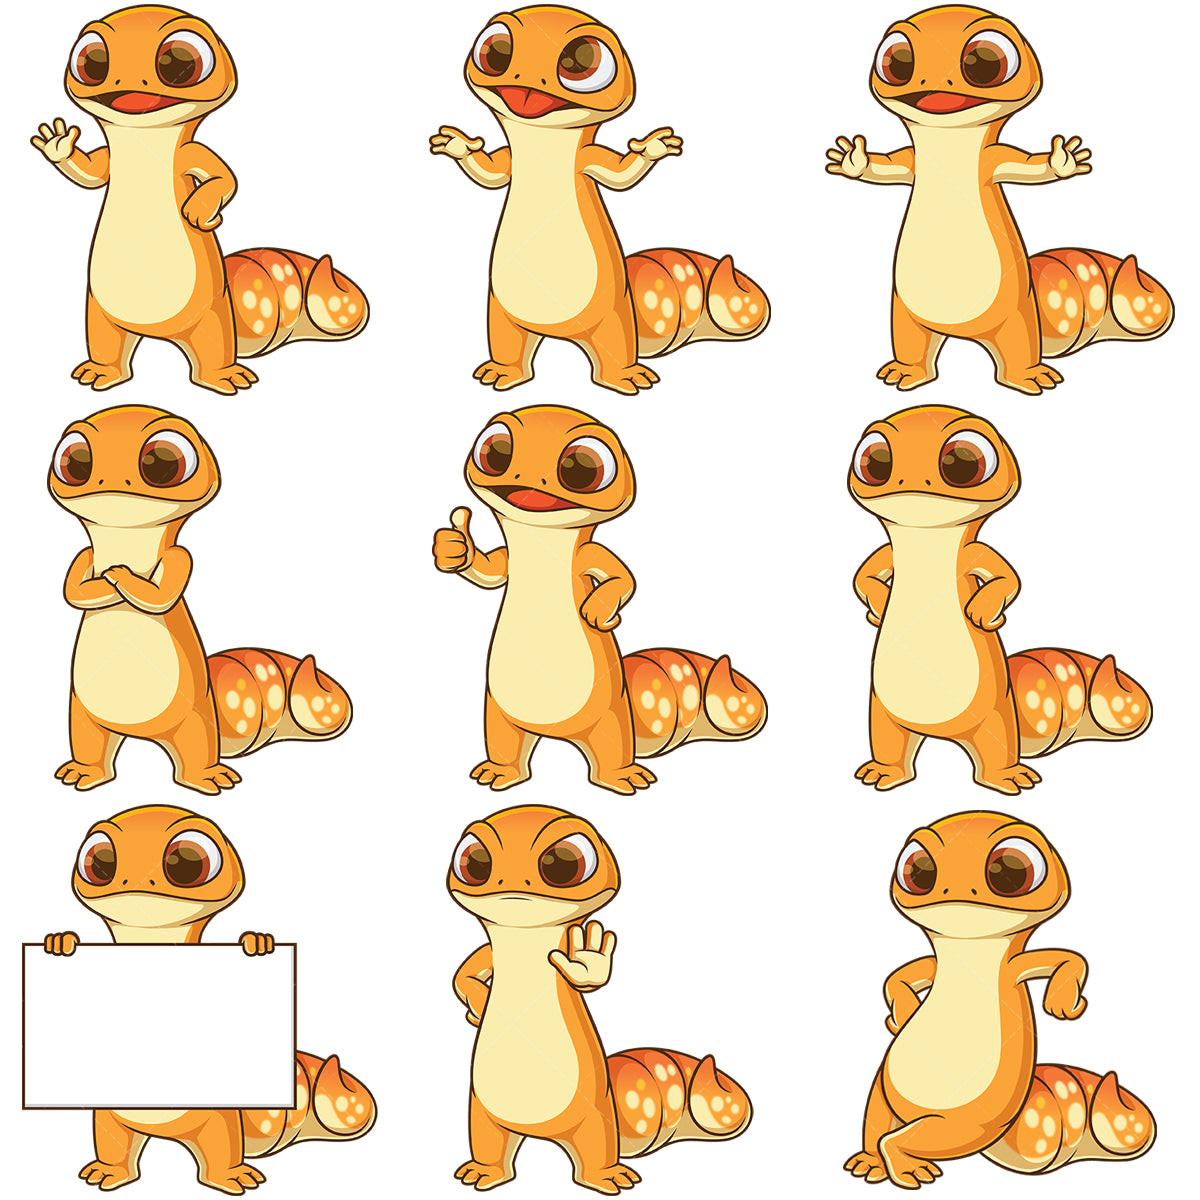 A bundle of 9 royalty-free stock vector illustrations of a gecko character.